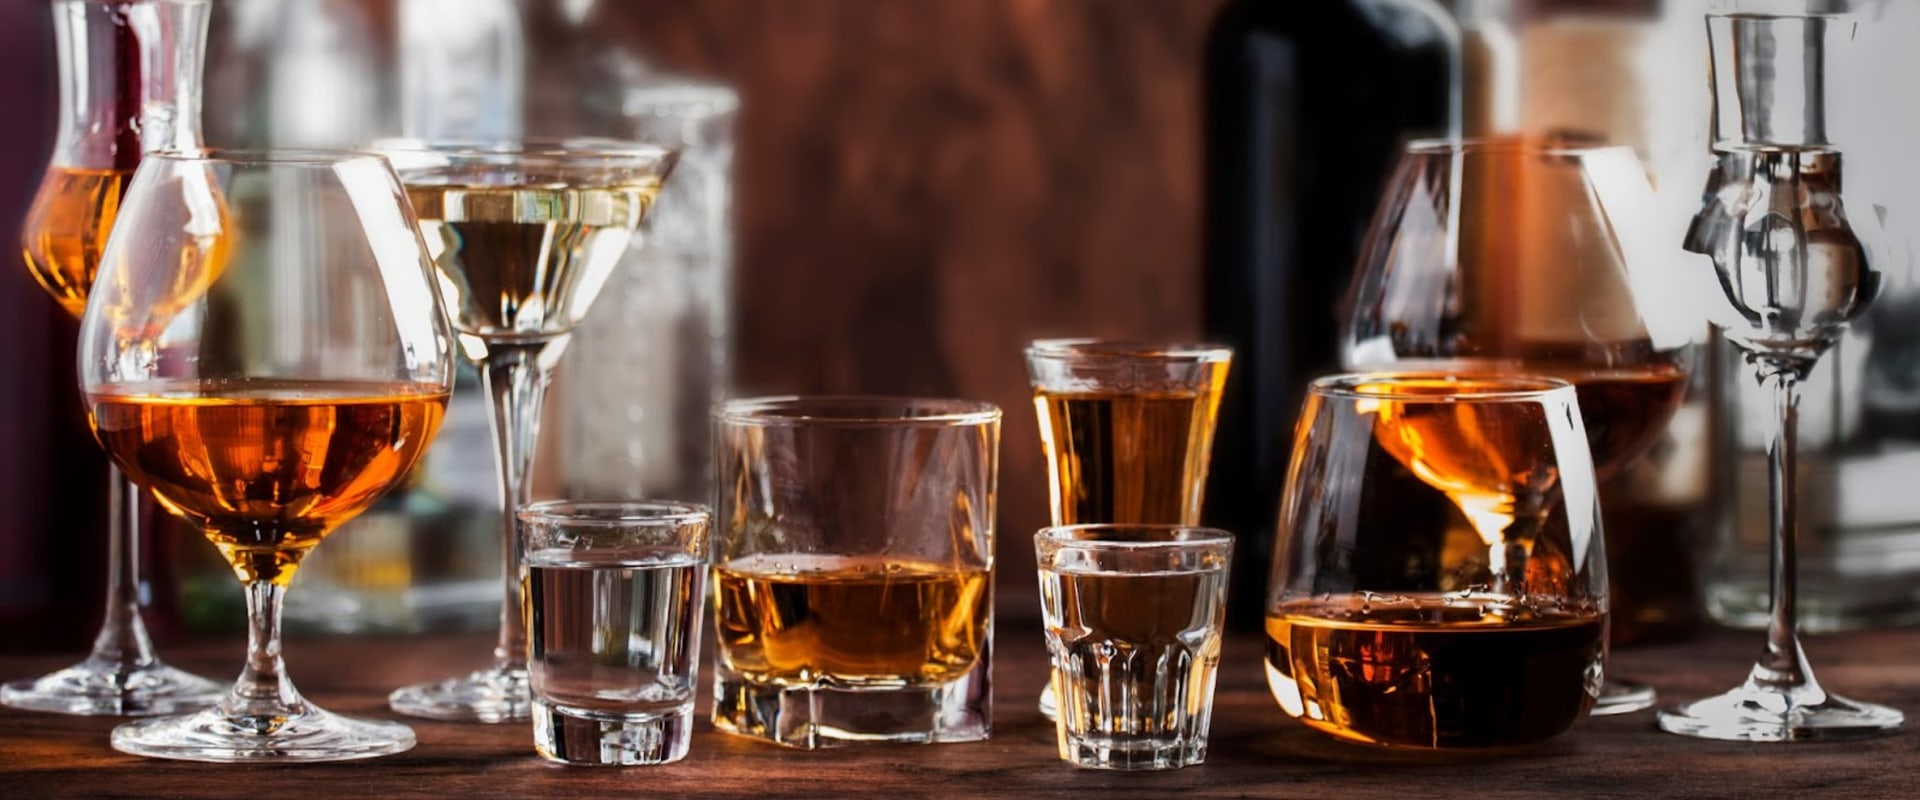 The Ins and Outs of Obtaining a Liquor License in Georgetown, TX